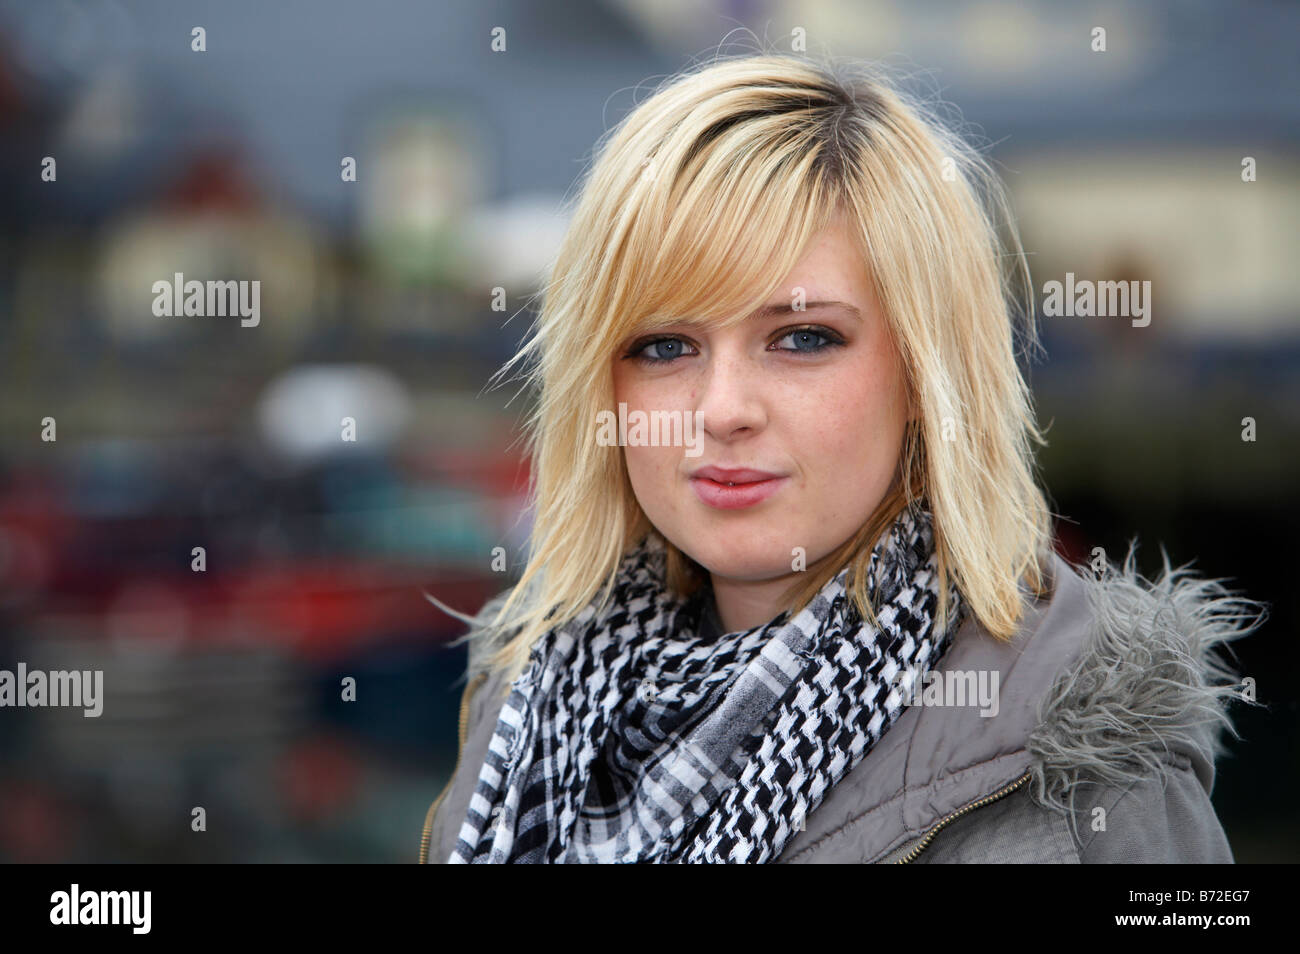 Blonde 18 Year Old Girl Wearing Jacket And Heavy Scarf Eye